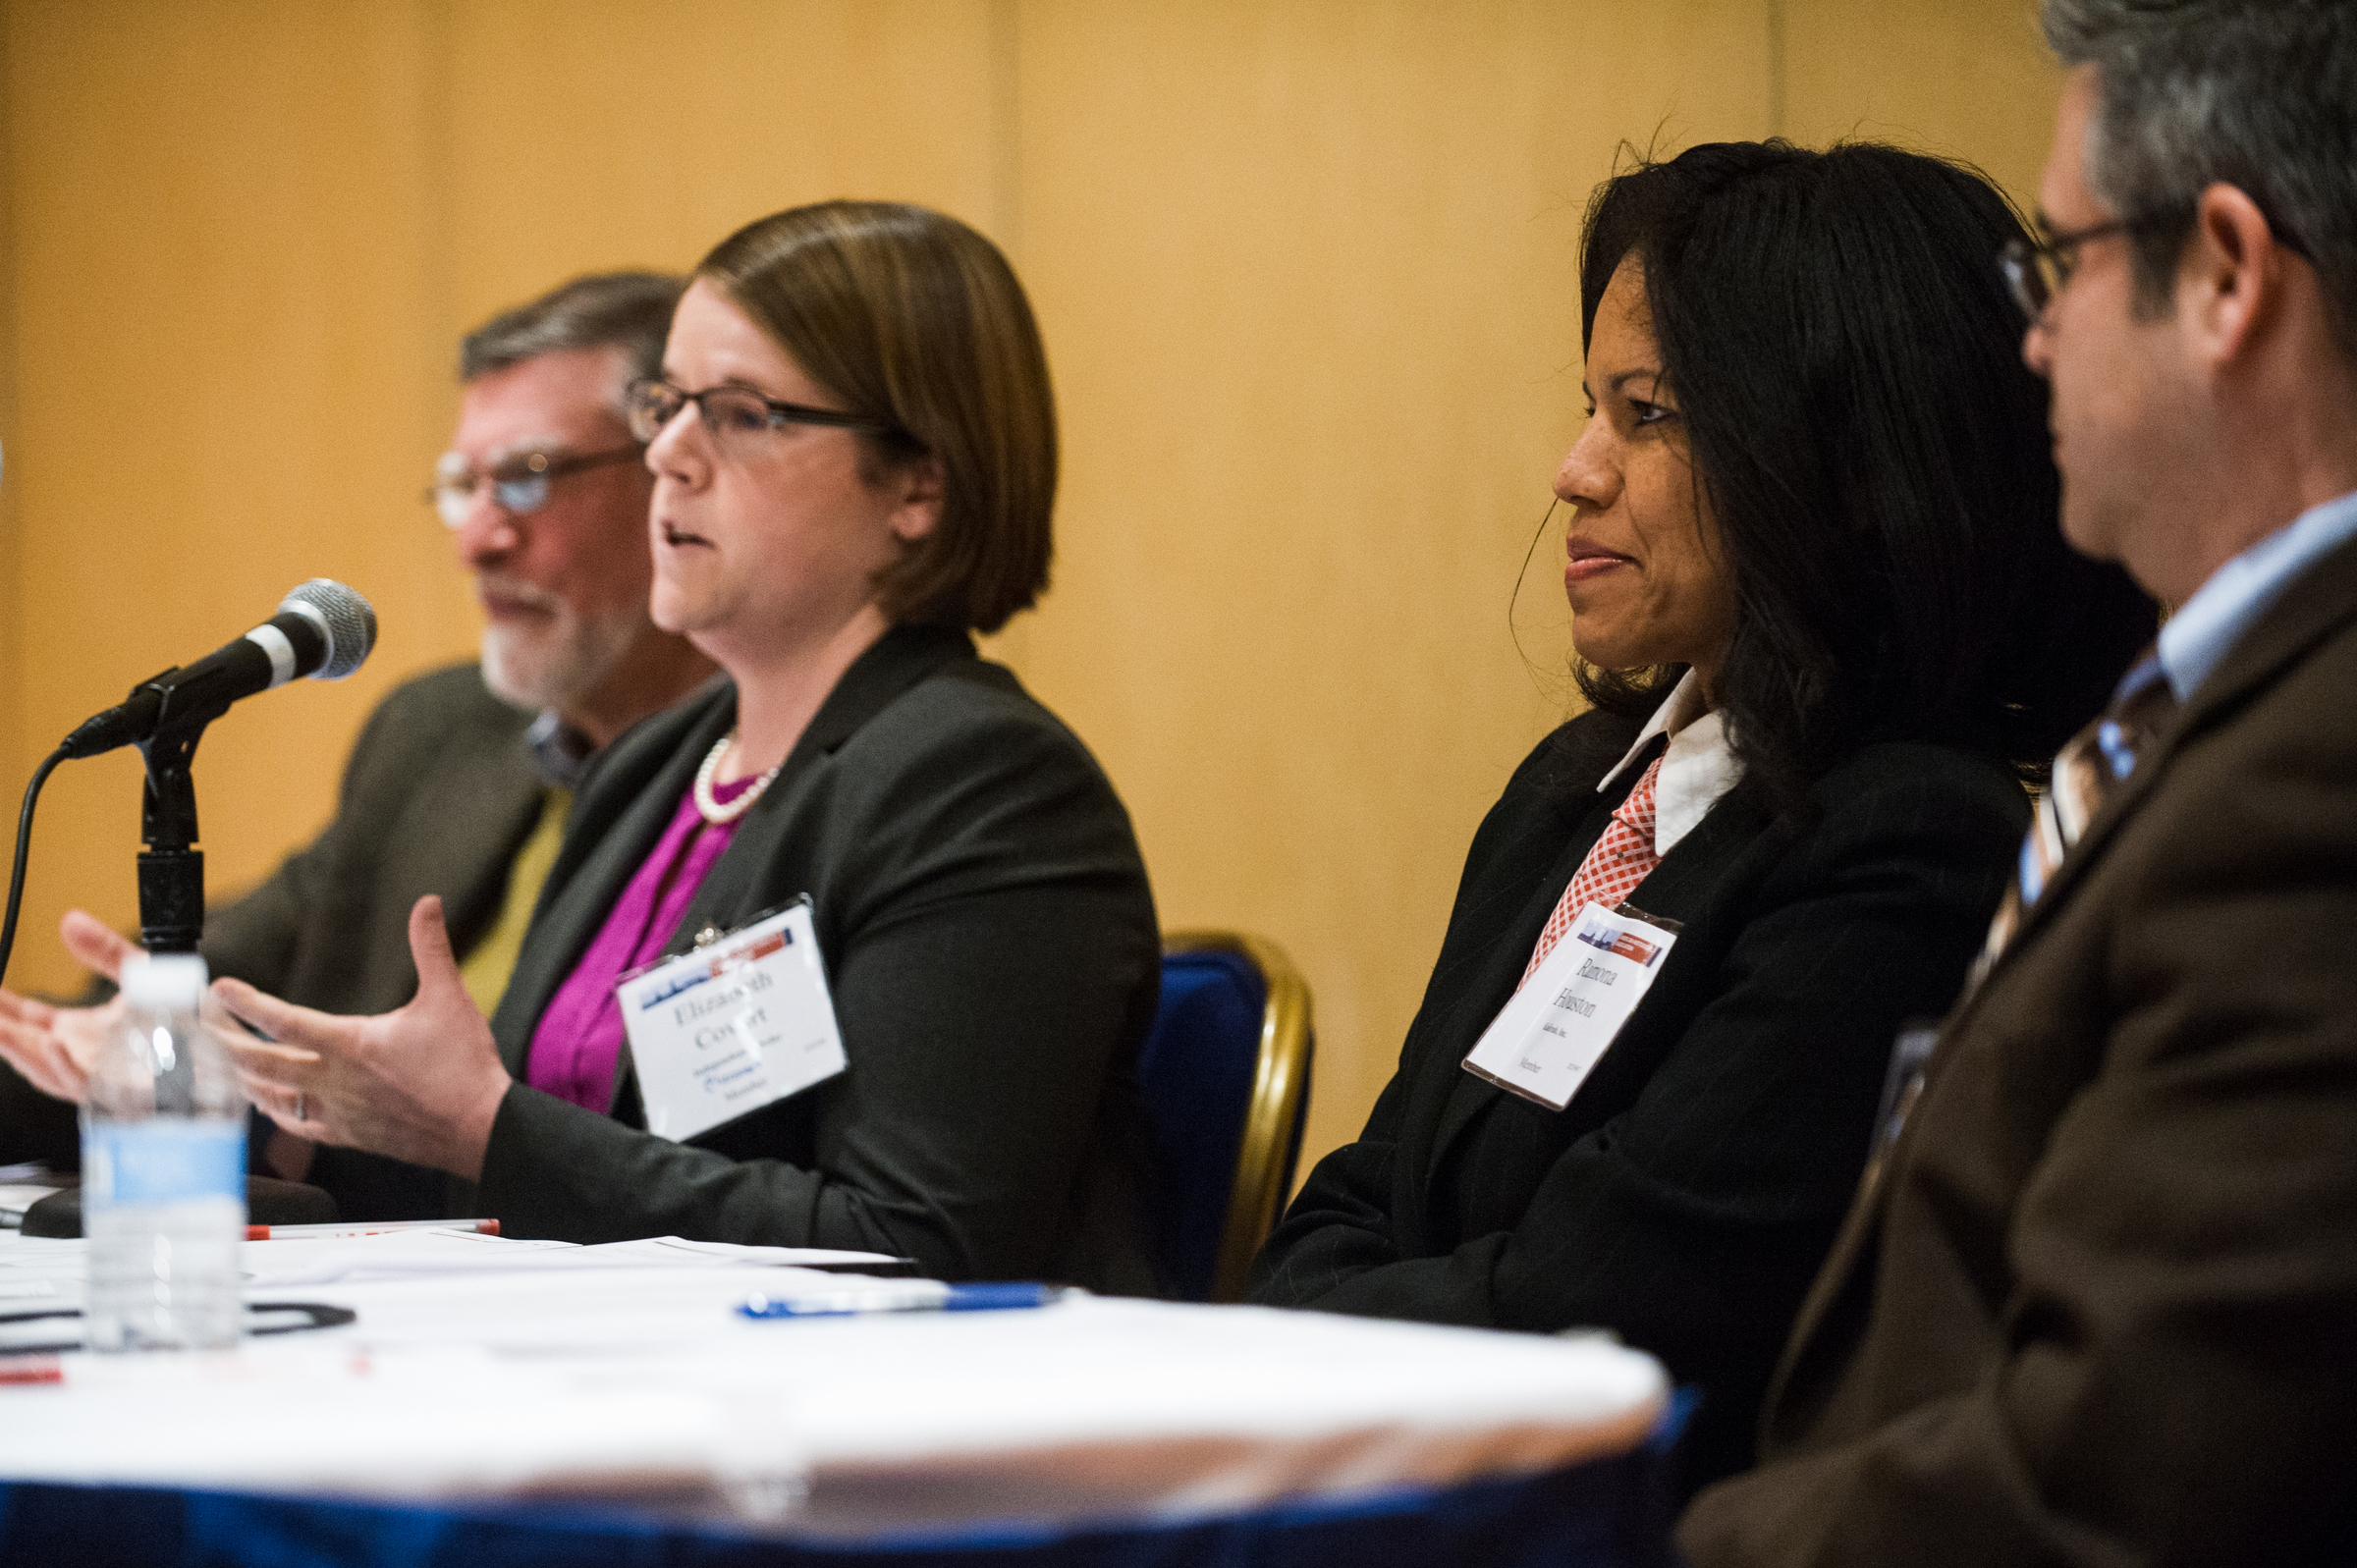 Photo by Marc Monaghan. <p>Walter M. Licht, Elizabeth Covart, Ramona Houston, and R. Darrell Meadows discuss the topic “Getting to the Malleable PhD” at the annual meeting.